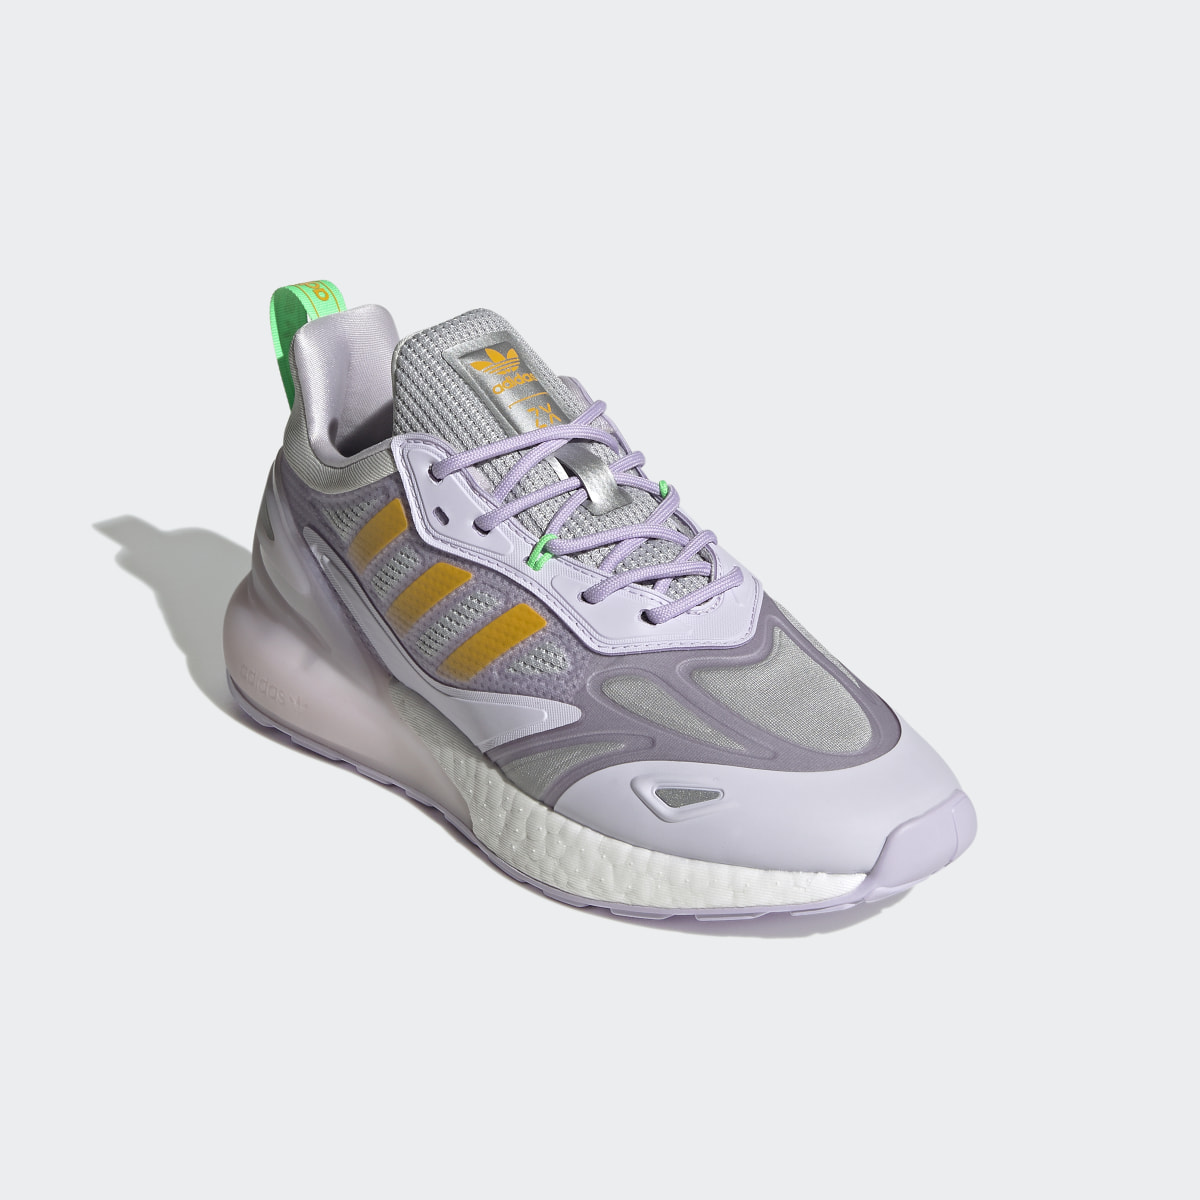 Adidas ZX 2K Boost 2.0 Shoes. 5